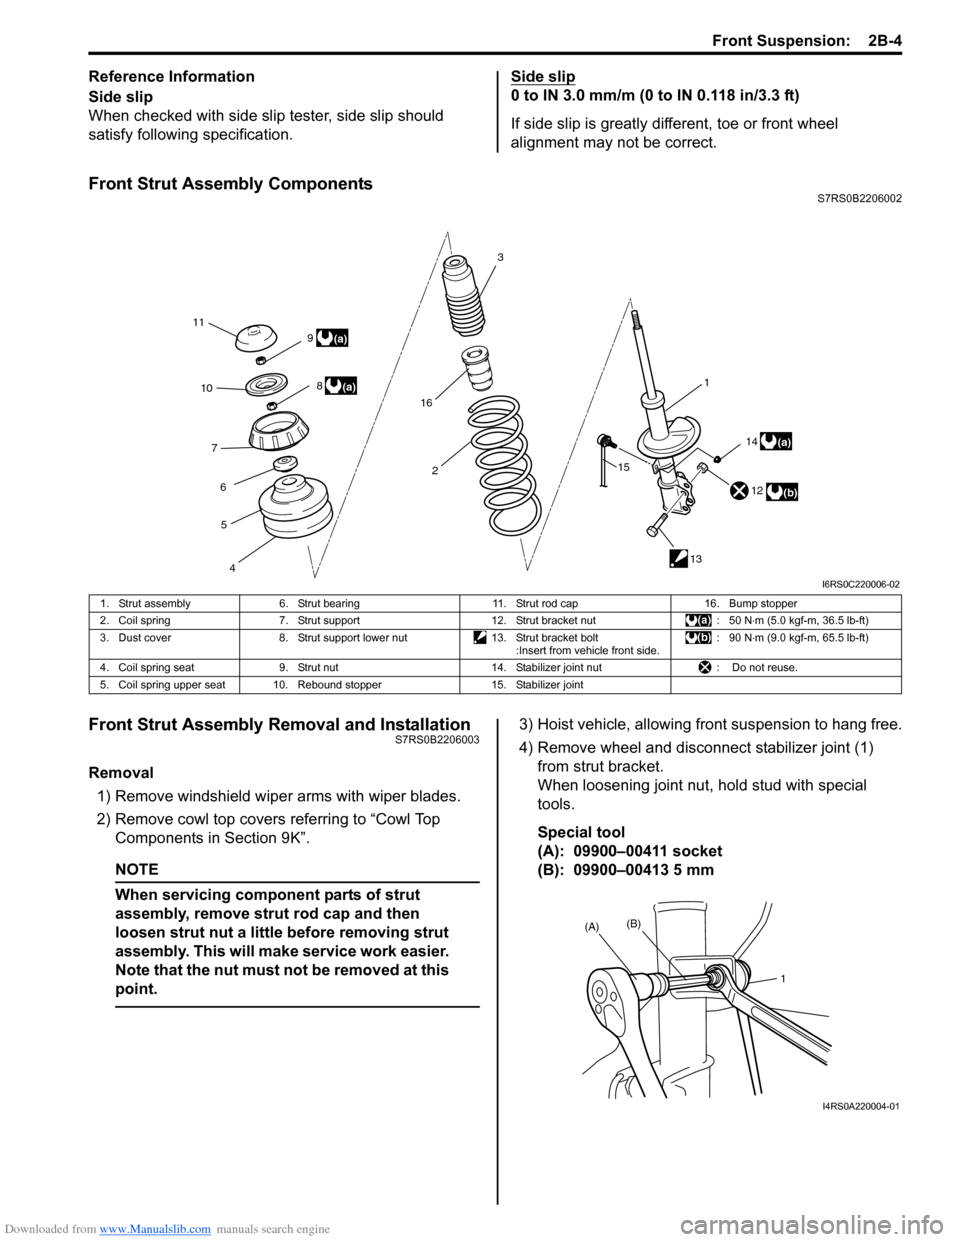 SUZUKI SWIFT 2006 2.G Service User Guide Downloaded from www.Manualslib.com manuals search engine Front Suspension:  2B-4
Reference Information
Side slip
When checked with side slip tester, side slip should 
satisfy following specification.S